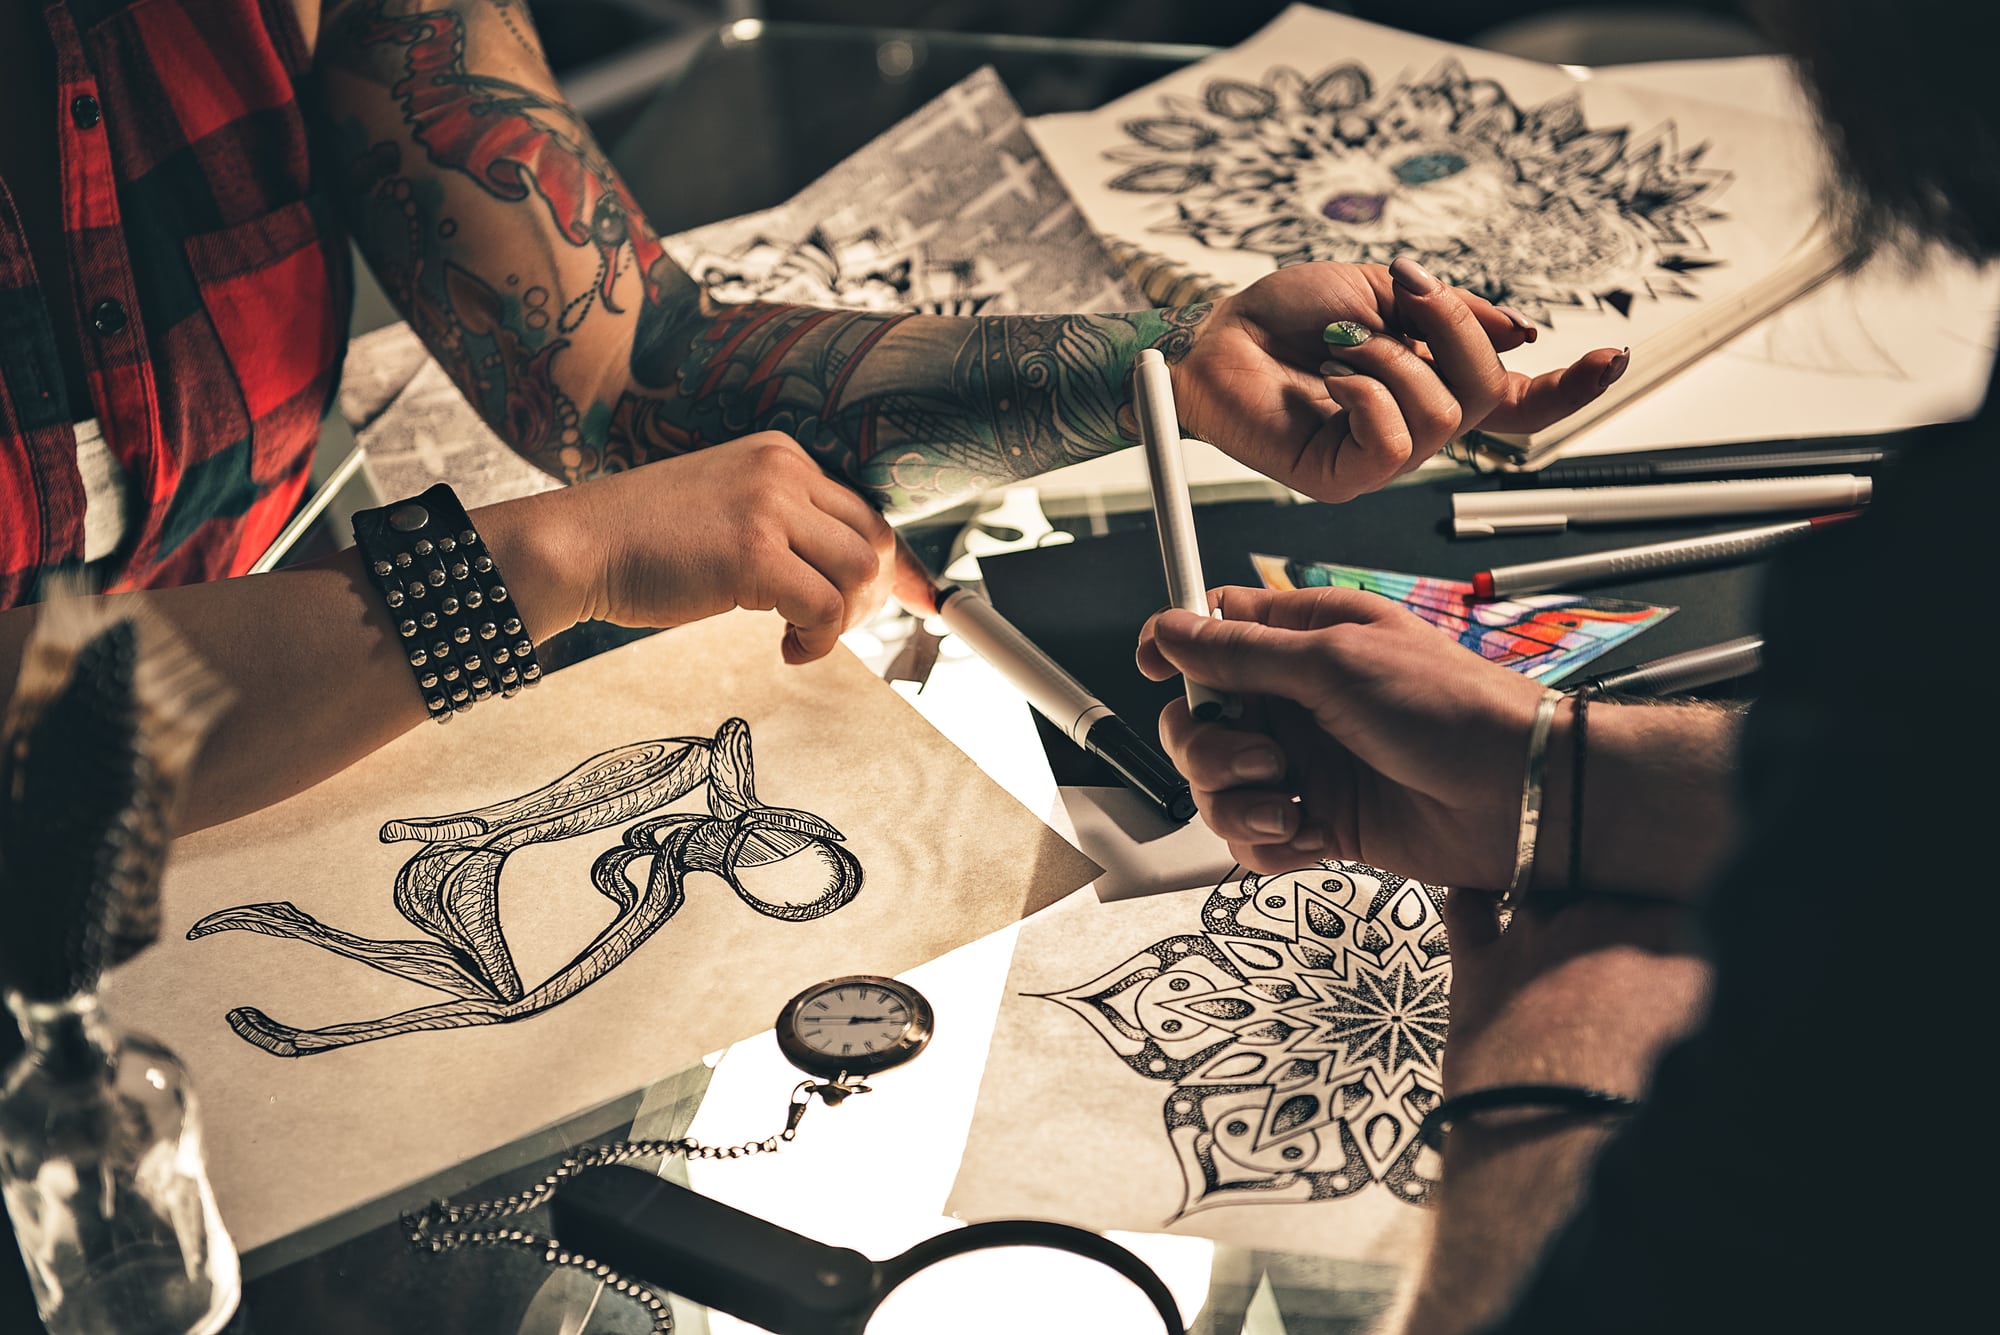 stock-photo-of-artists-client-discussing-tattoo-design